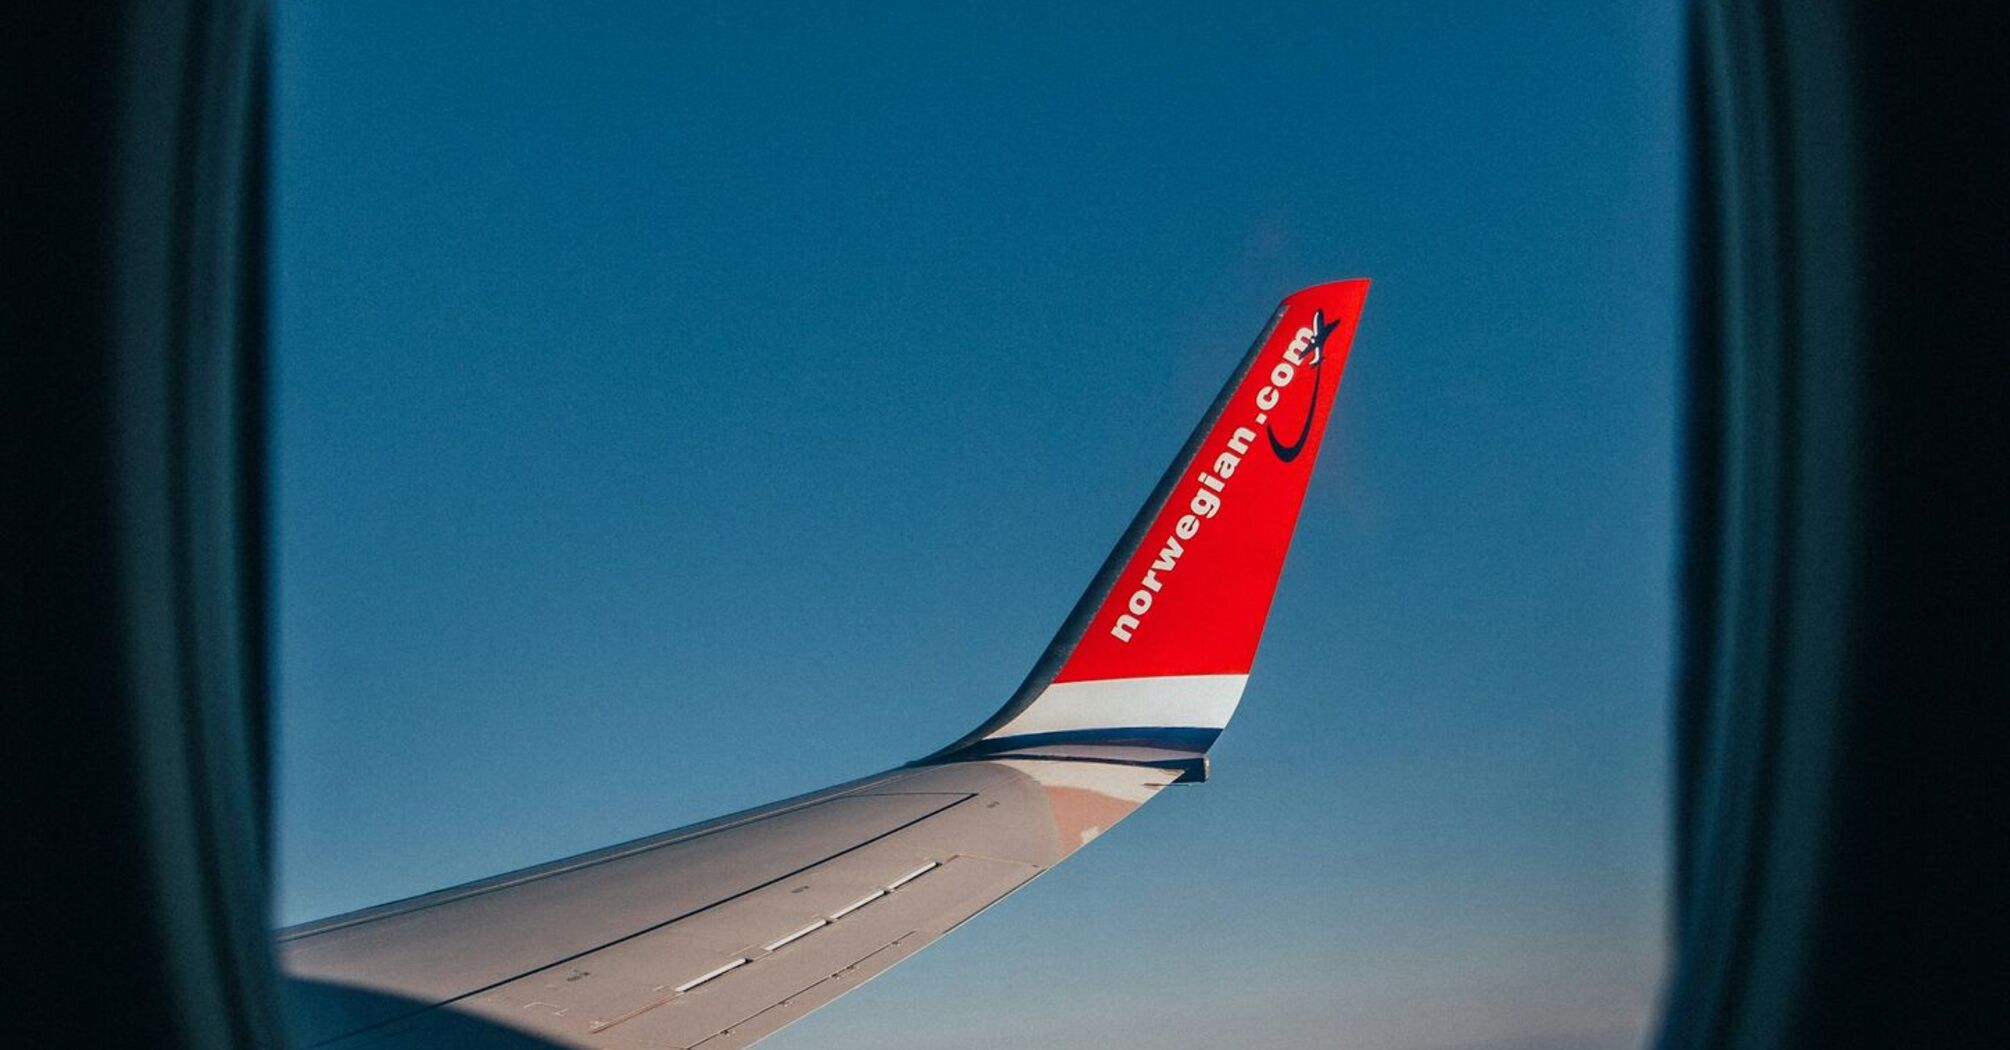 View from an airplane window showing a wing with the Norwegian Air logo against a clear blue sky